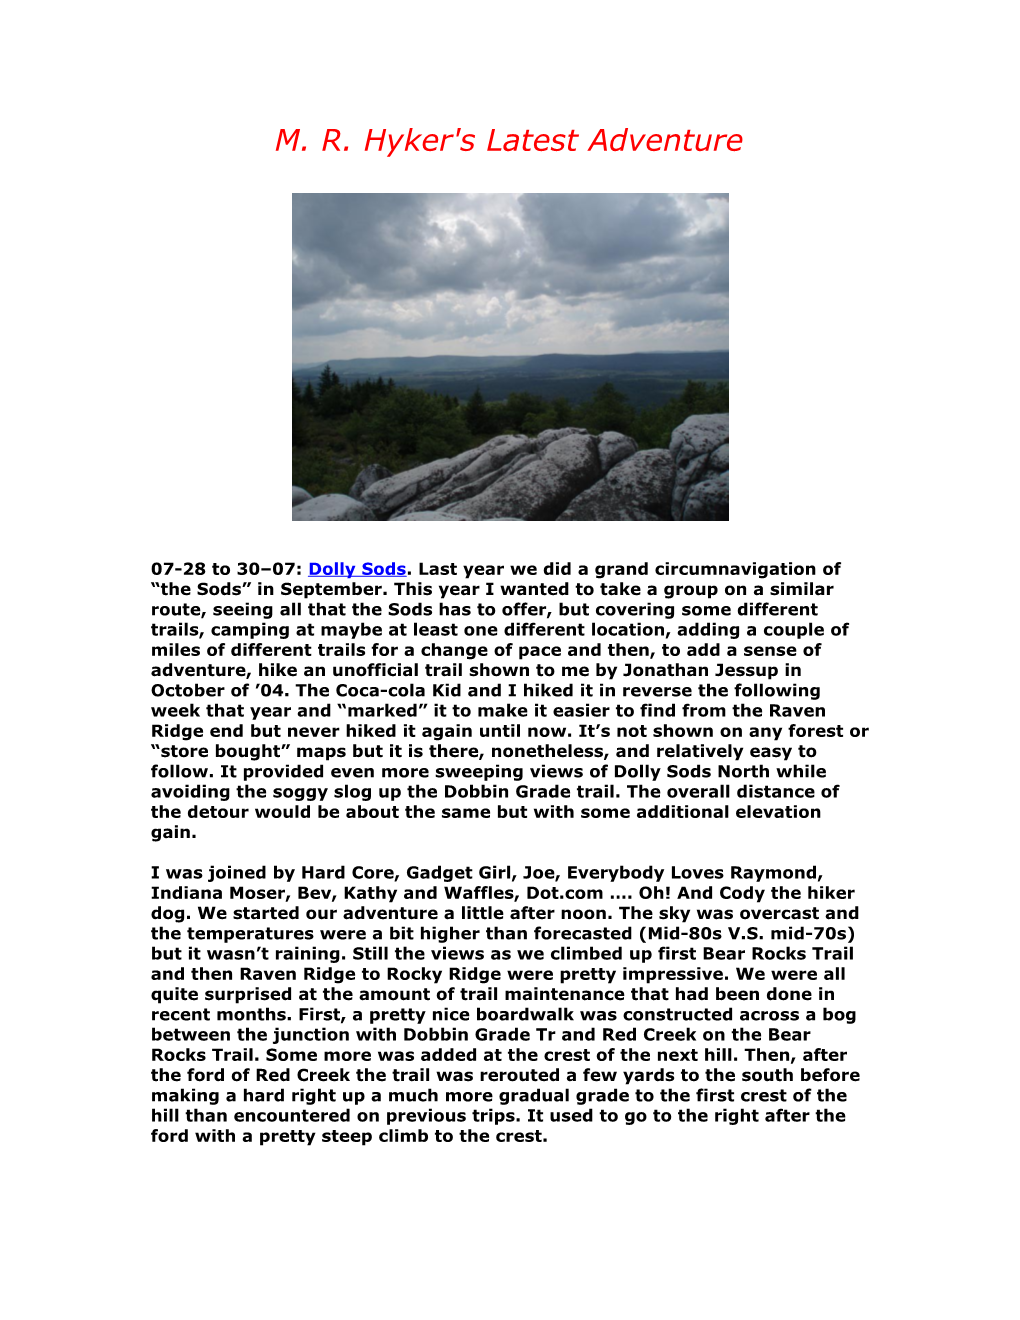 07-28 to 30 07: Dolly Sods